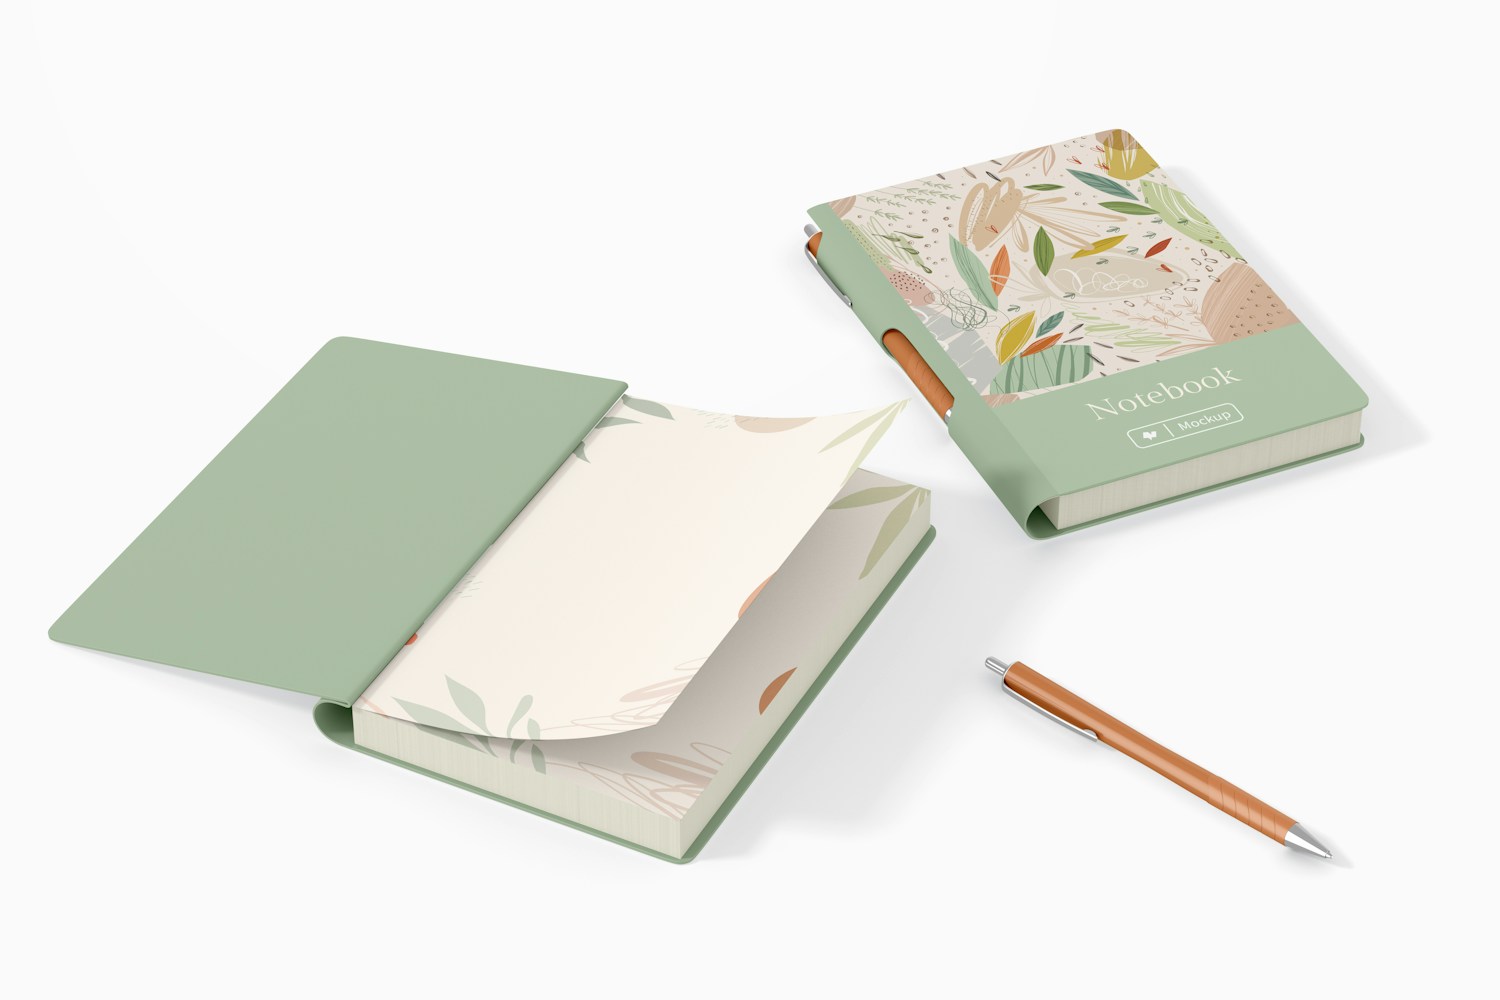 Notebooks with Lateral Pen Holder Mockup, Opened and Closed